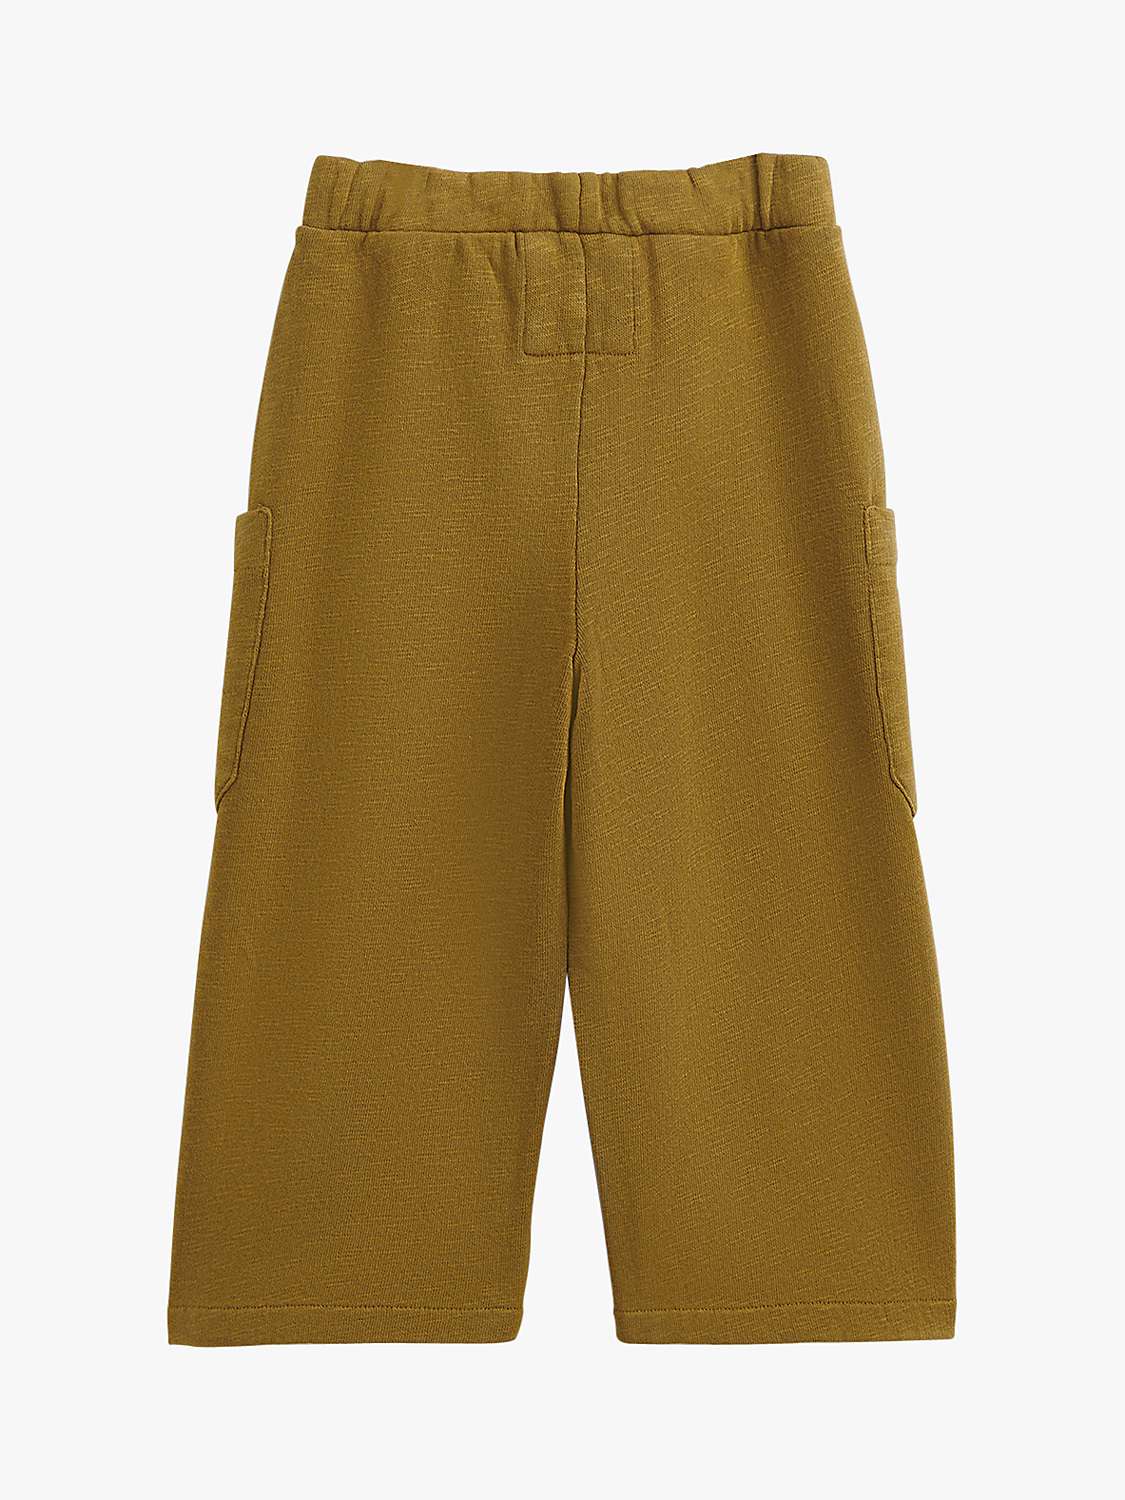 Buy Whistles Kids' Billy Pocket Trousers Online at johnlewis.com